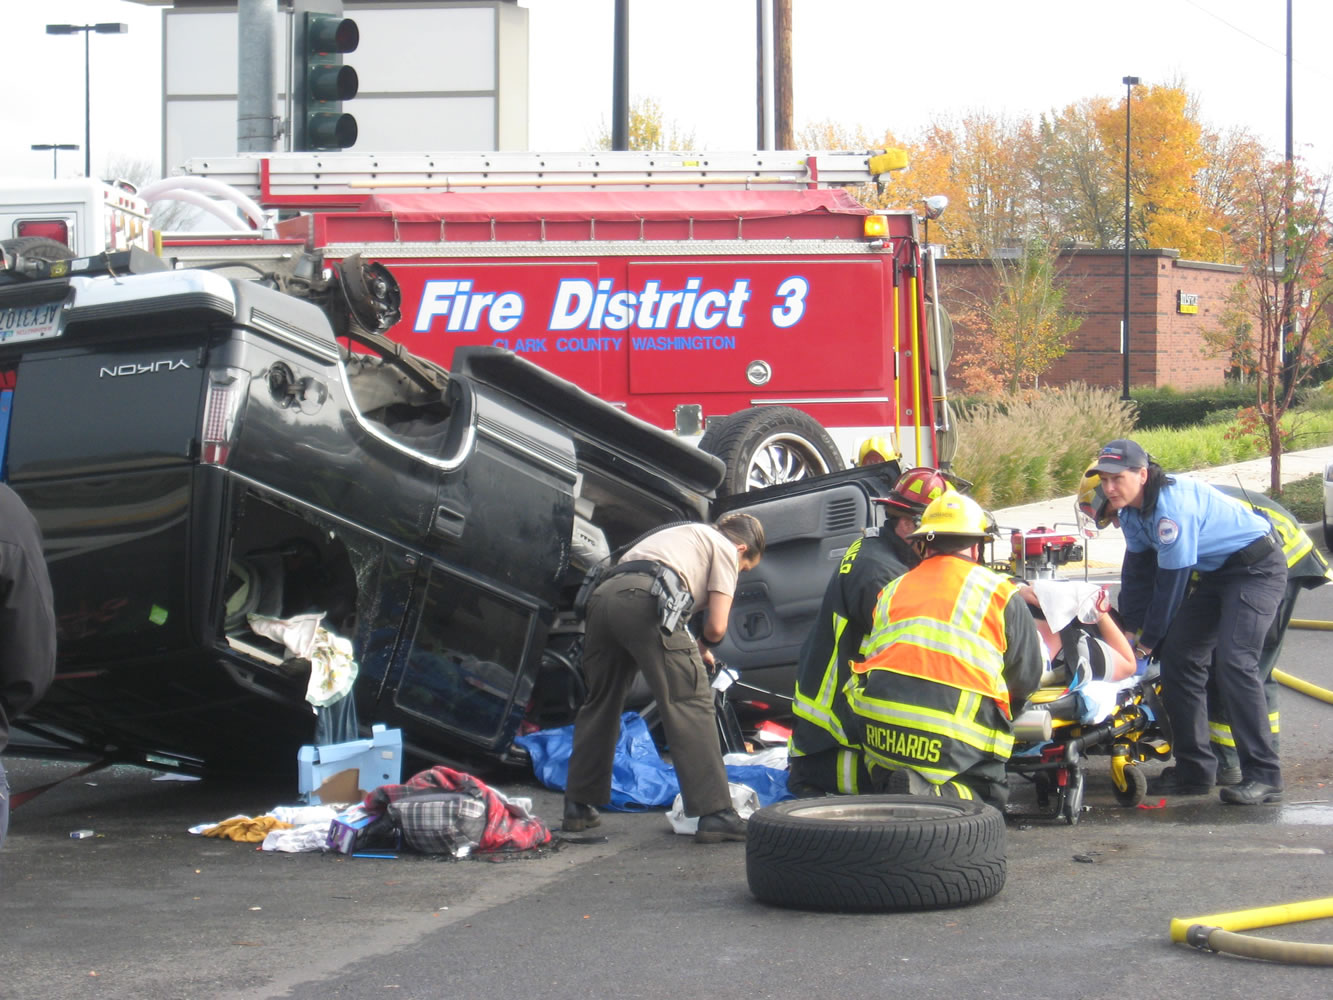 Firefighters with Clark County Fire District 3 responded to a rollover crash near the Winco in Brush Prairie Monday morning.